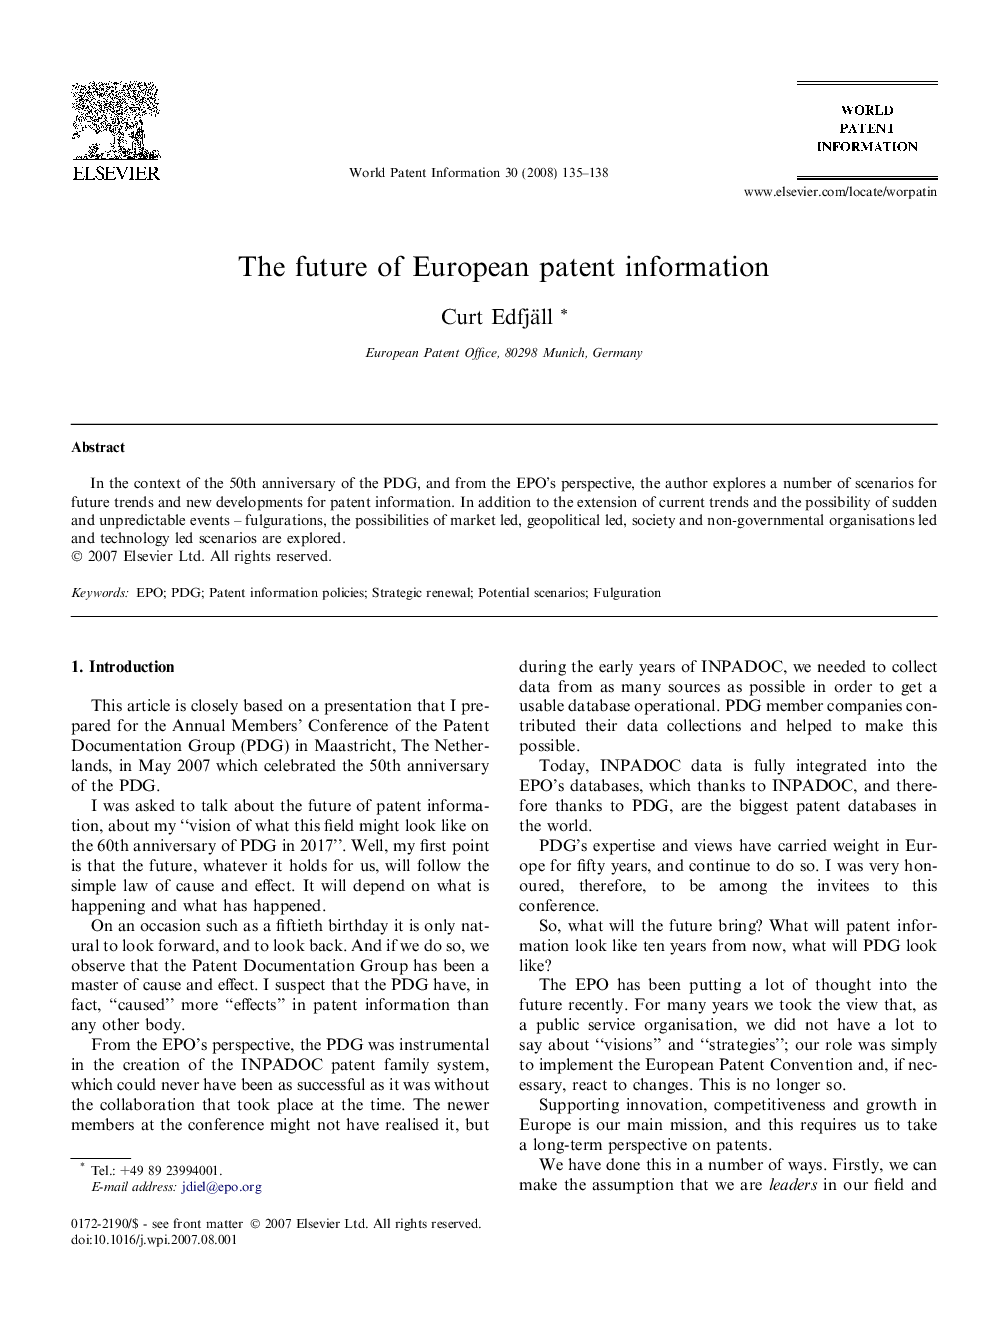 The future of European patent information